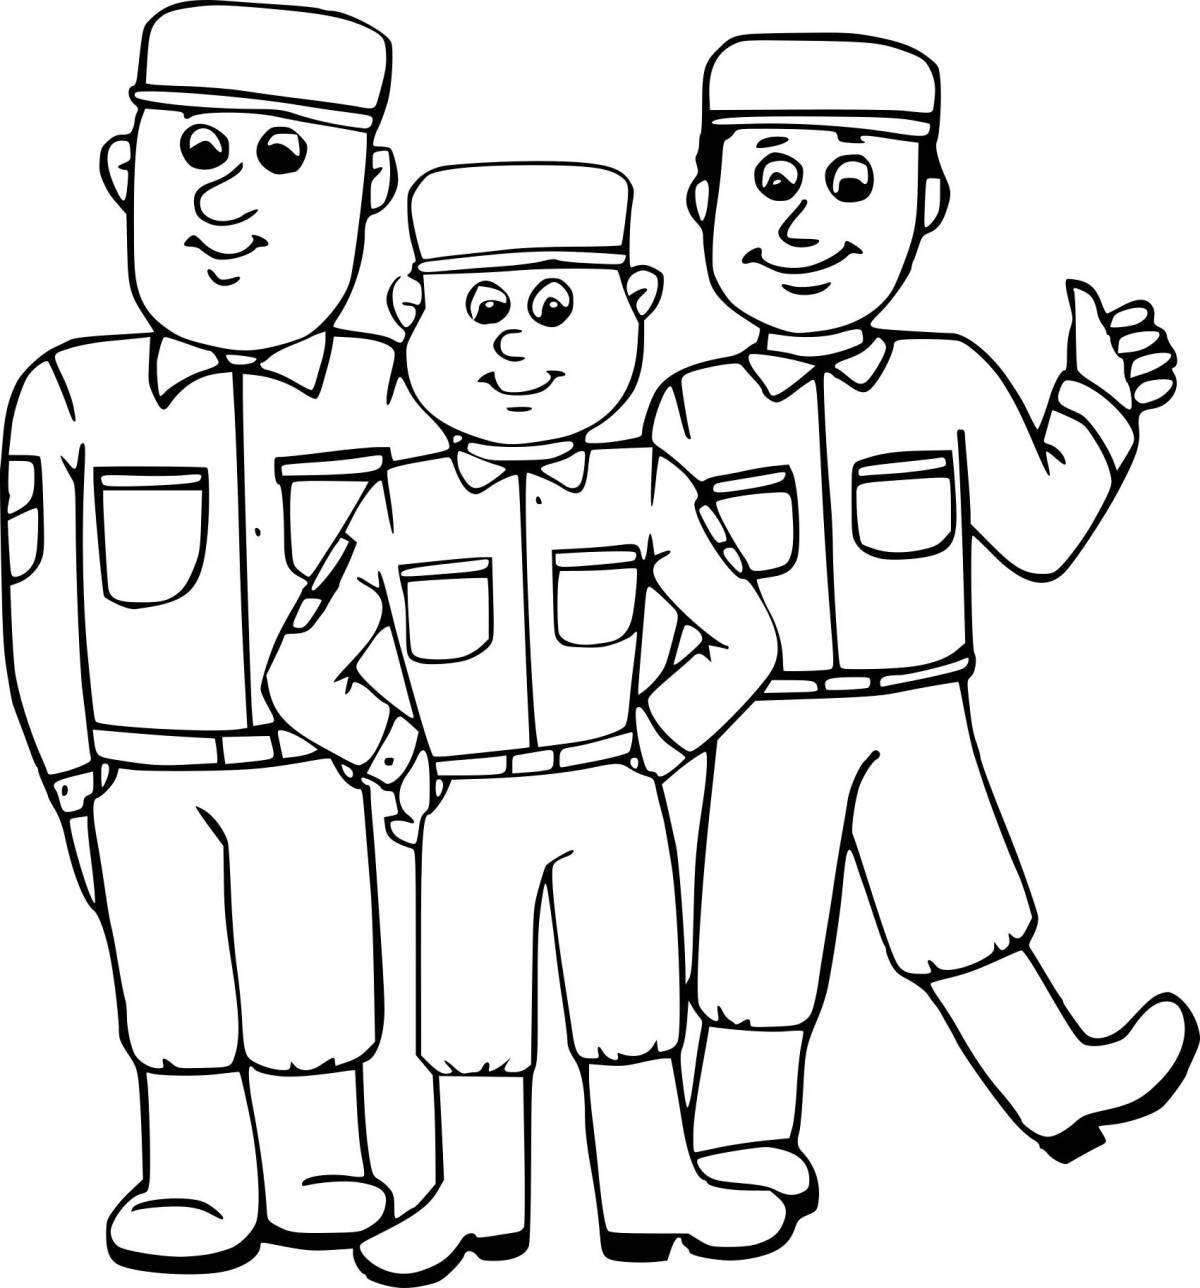 Bright soldier and children's coloring